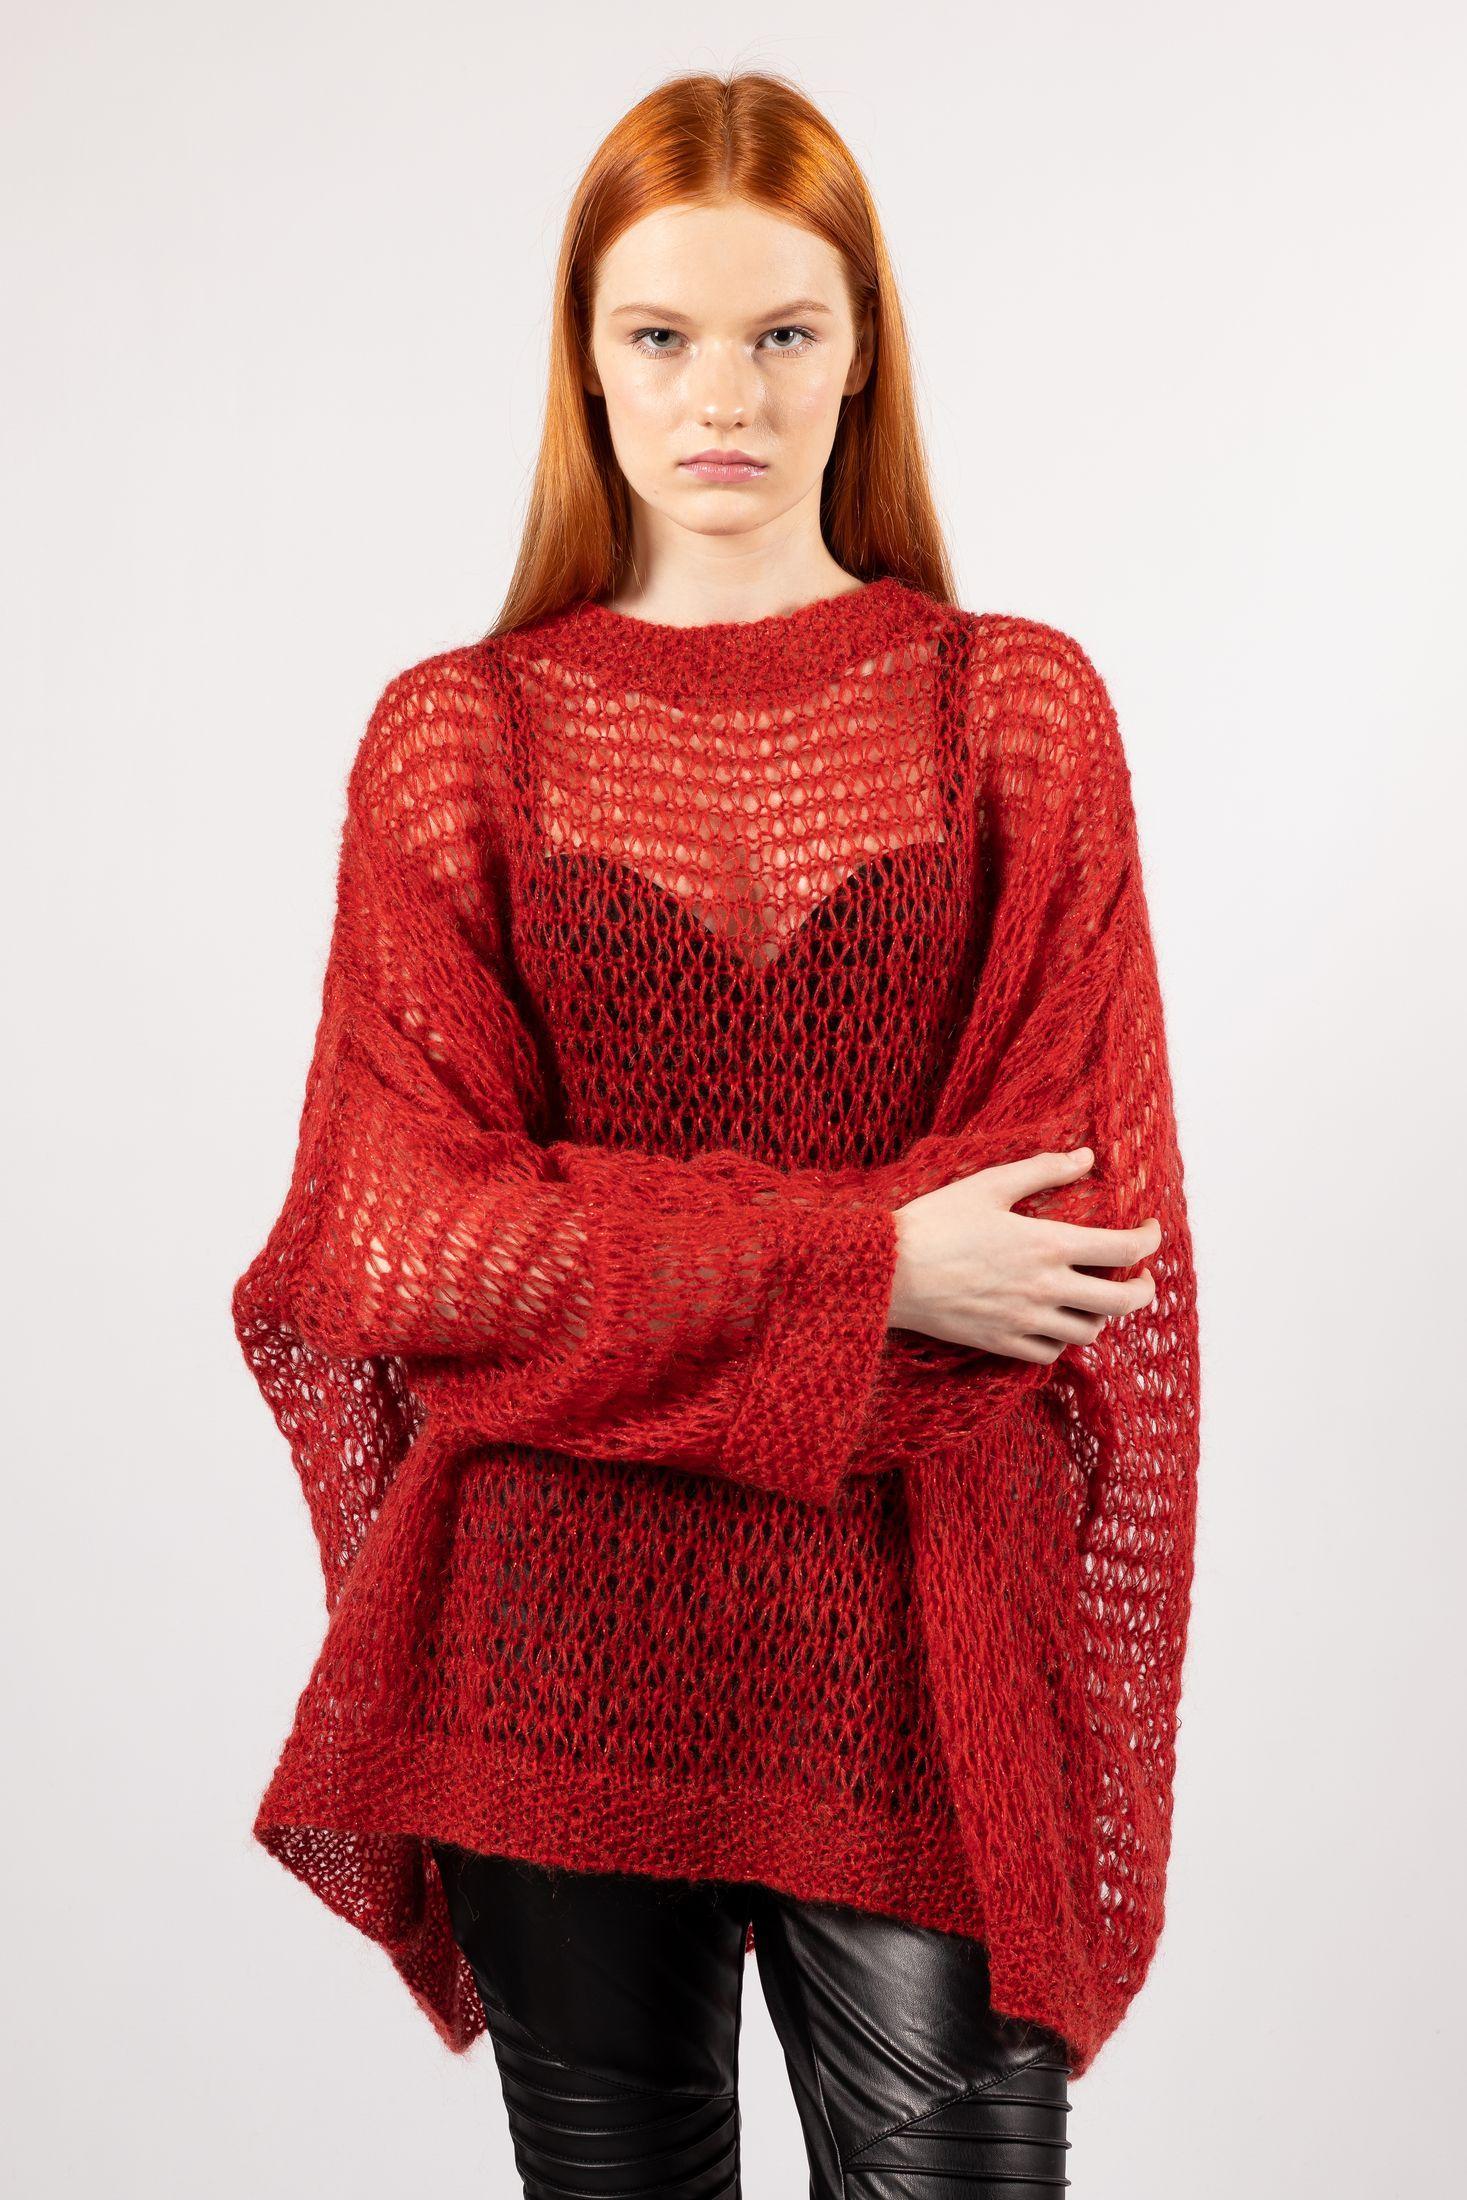 Unique and cozy red mohair tunic sweater from IDA, highlighting an open-loop hand-knit texture